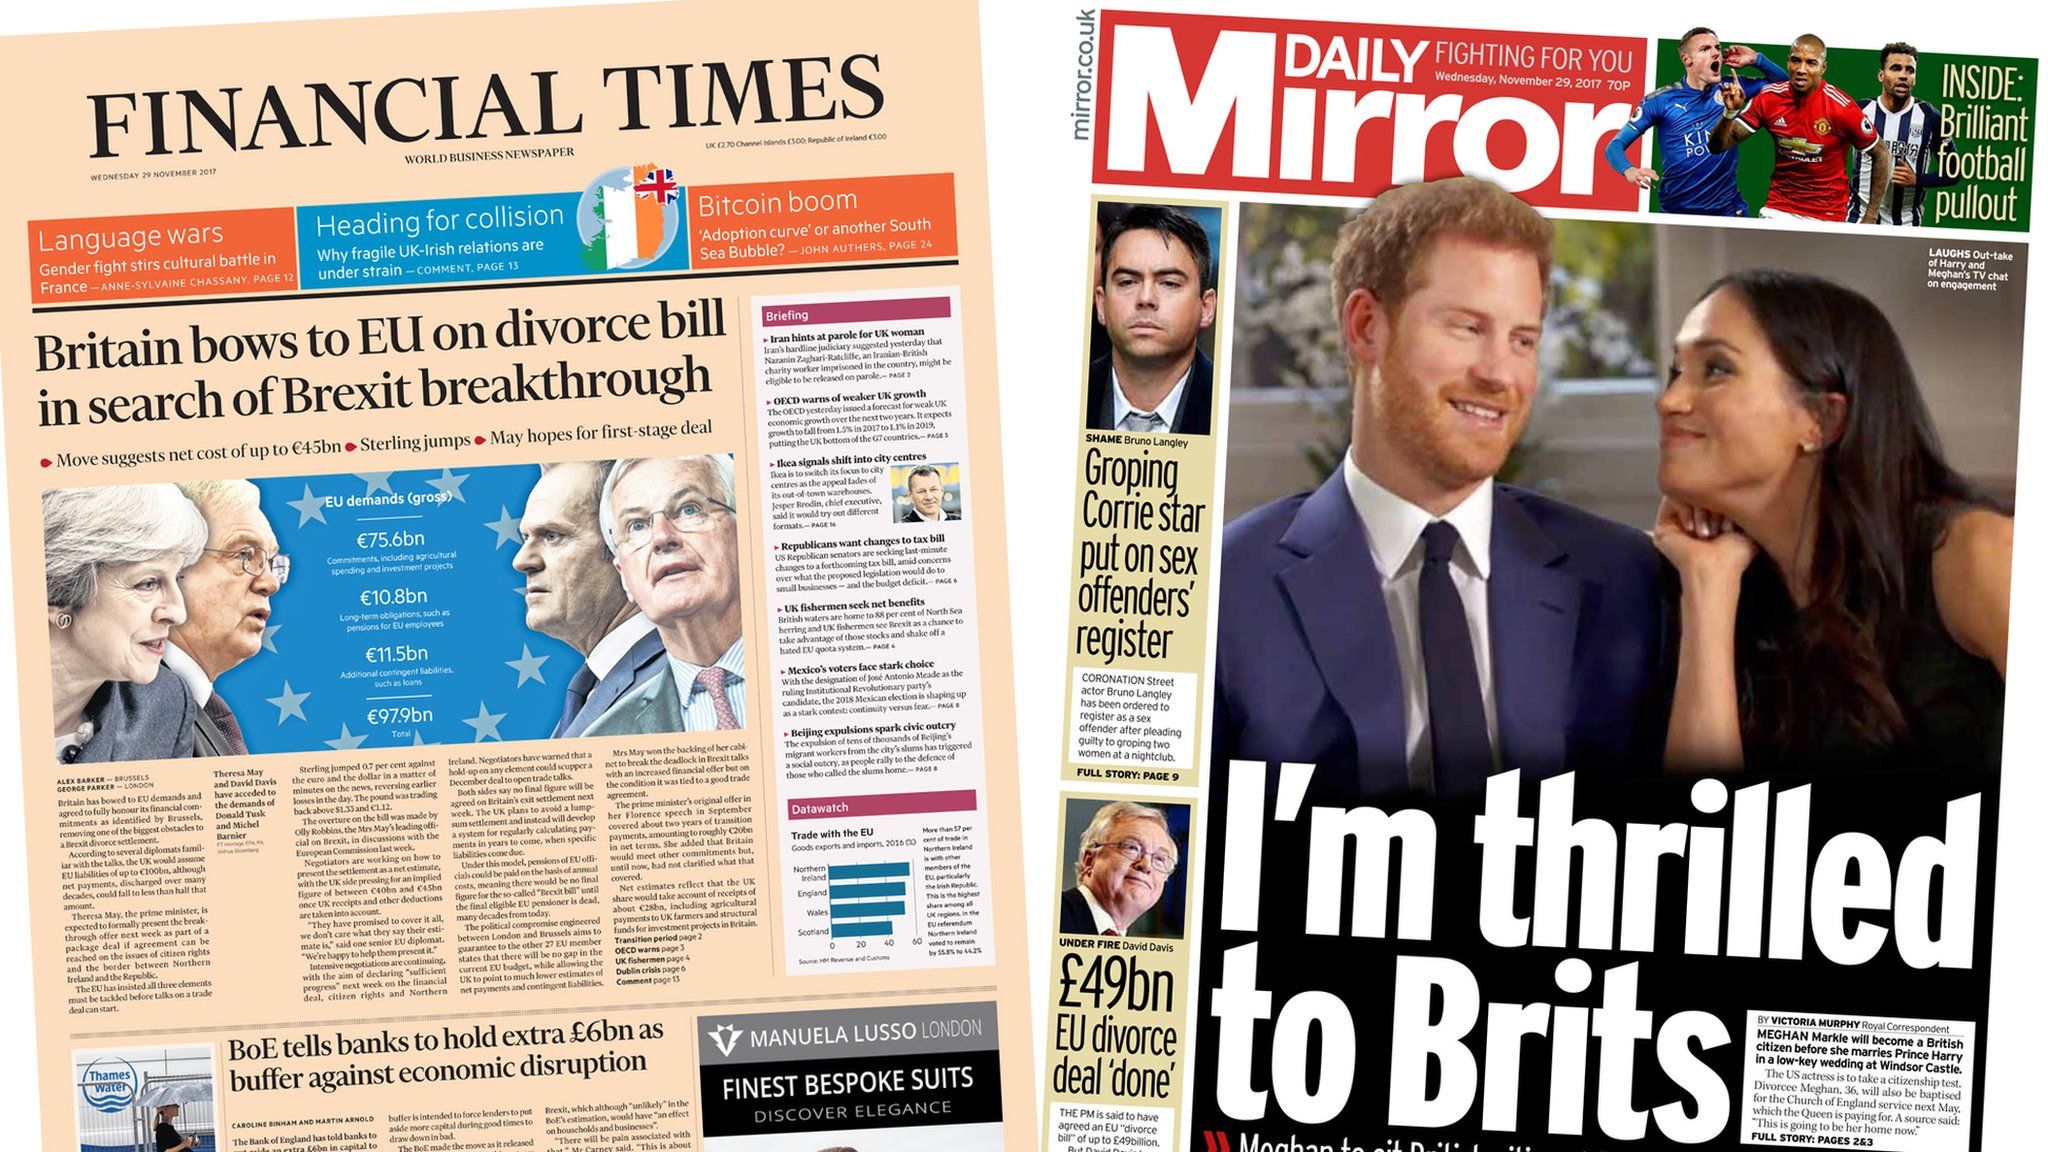 Financial Times and Daily Mirror